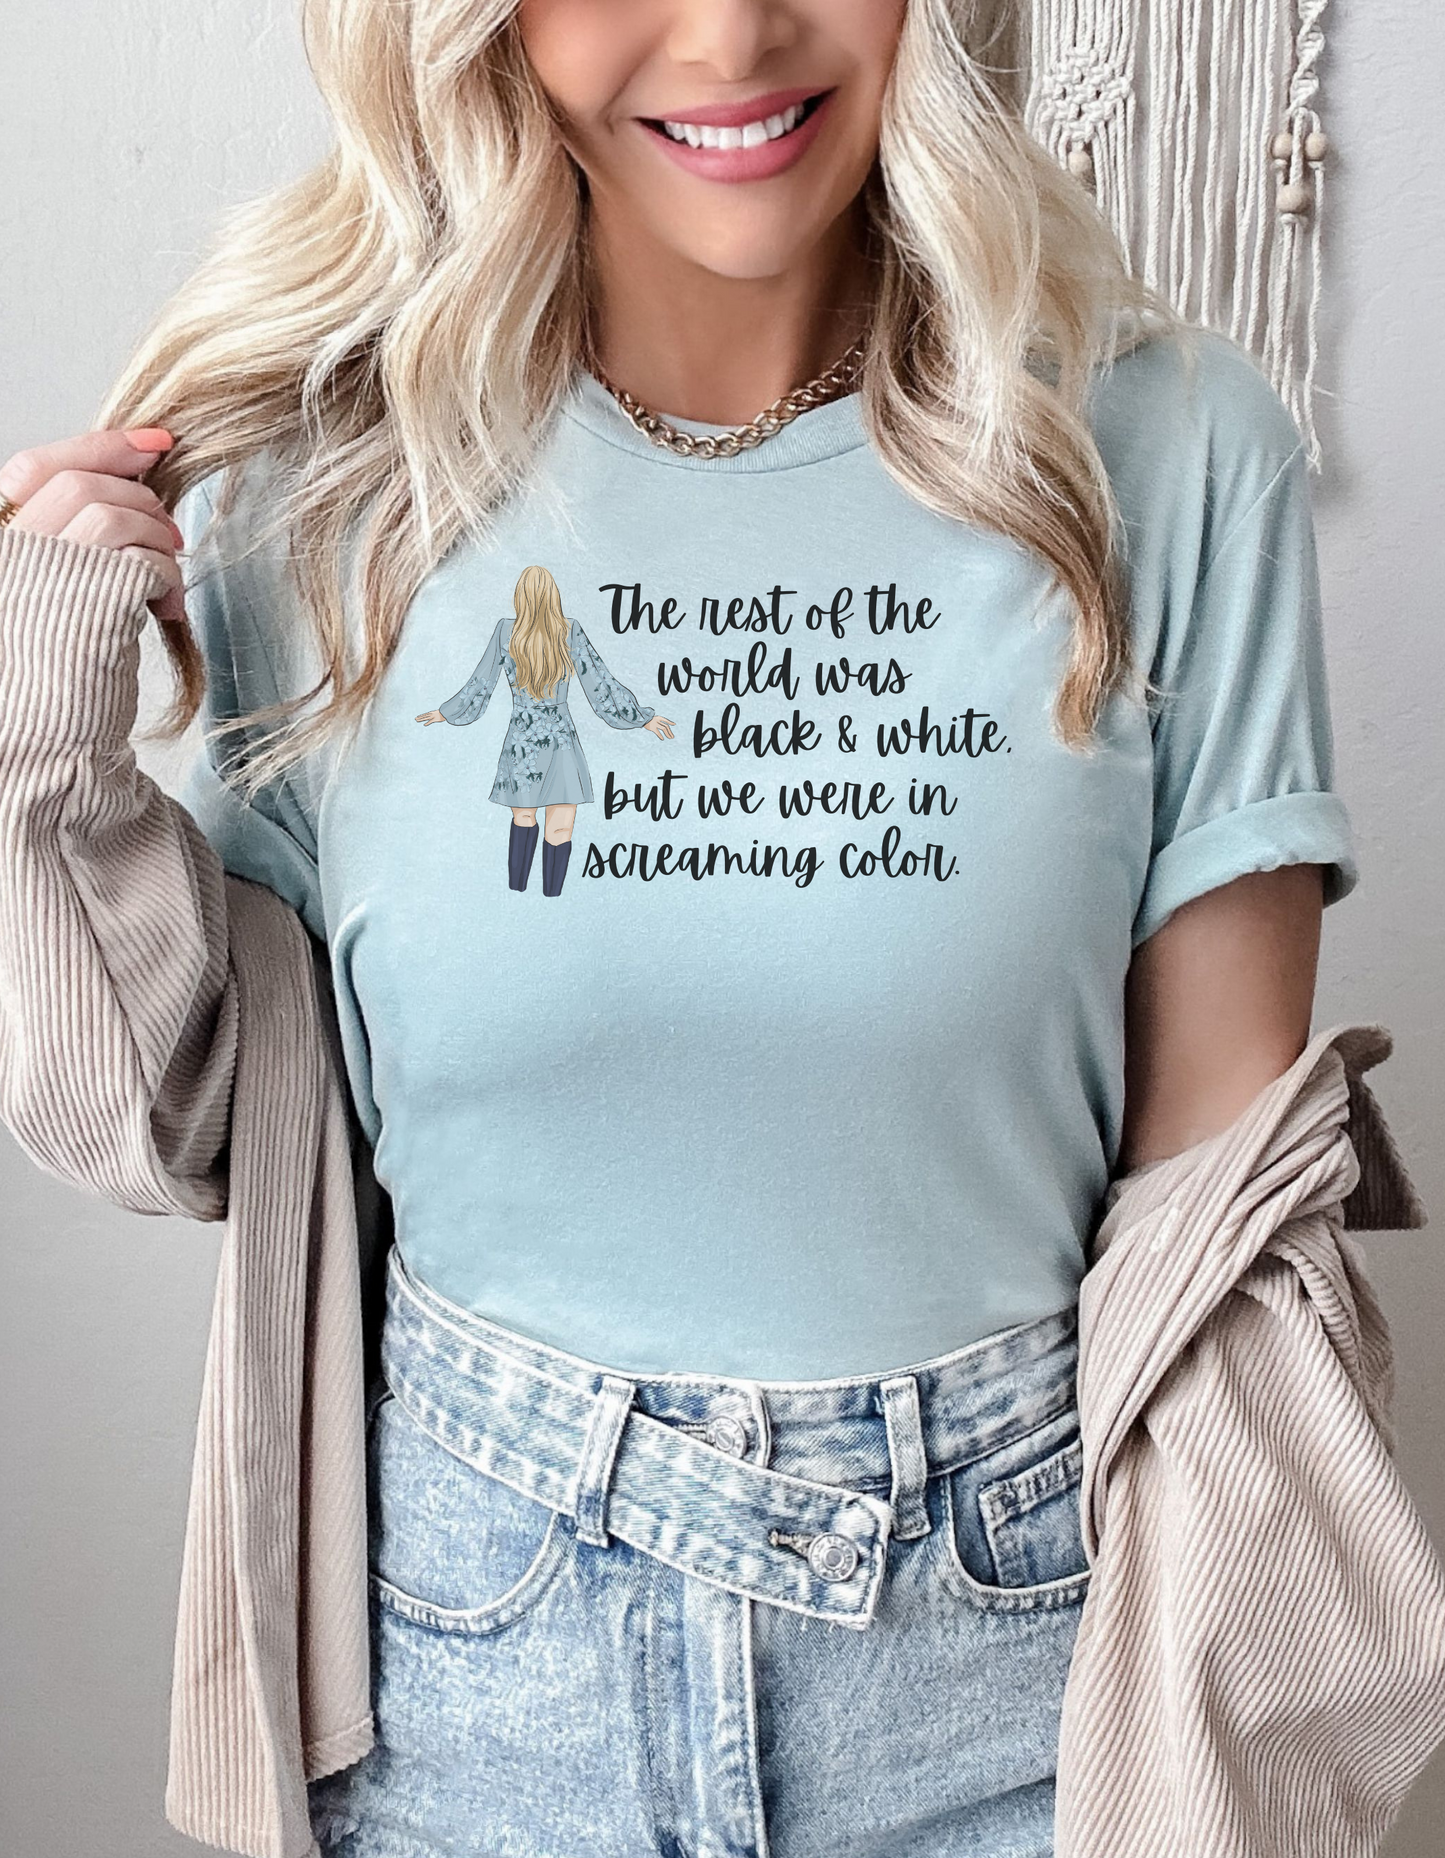 Taylor Swift Preppy Picture T-Shirt - The Rest of The World Was Black & White